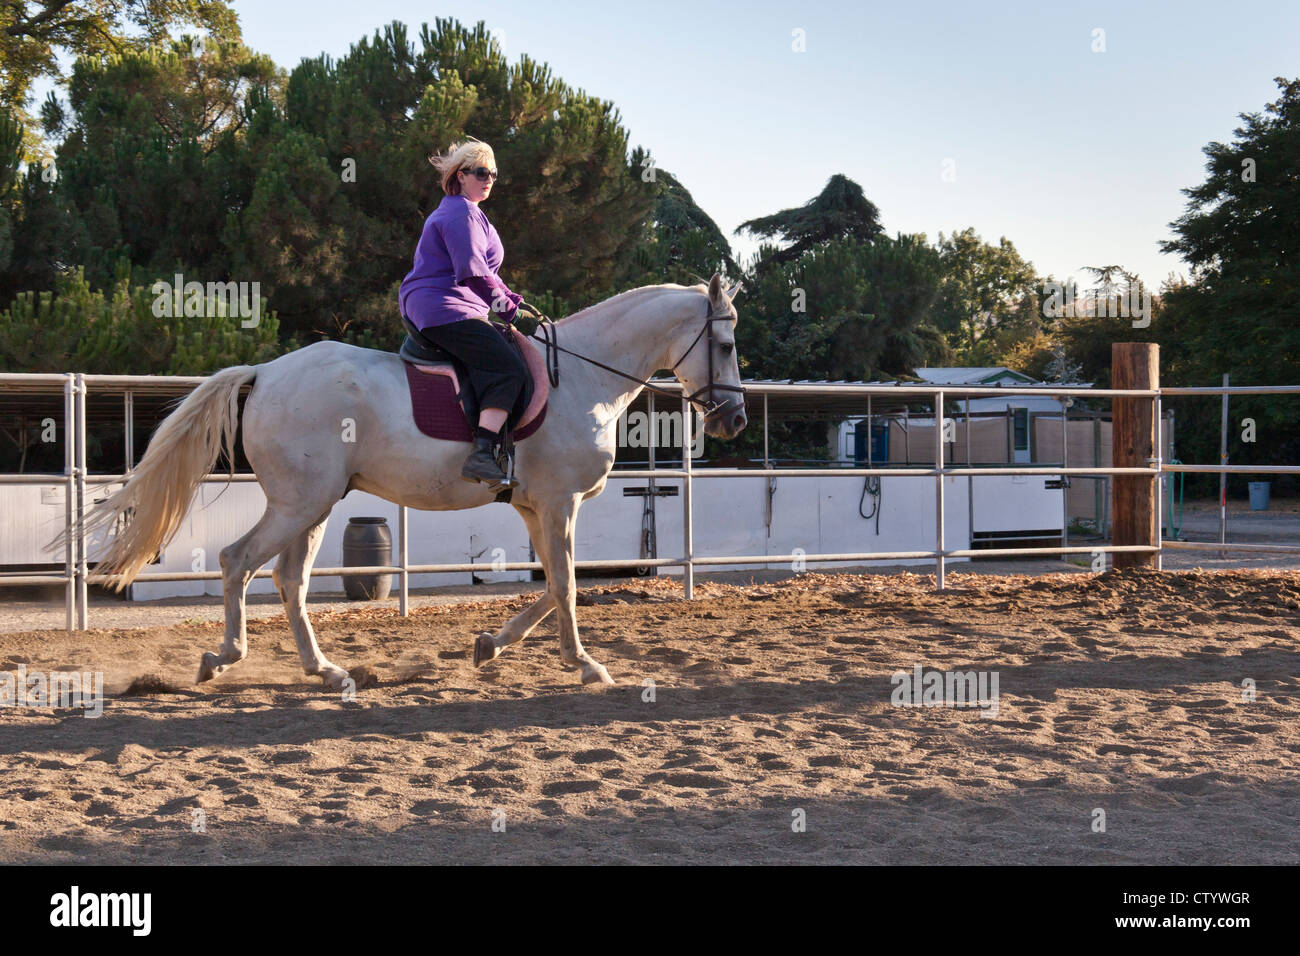 A blond haired woman is riding a white horse with a dressage saddle. Stock Photo